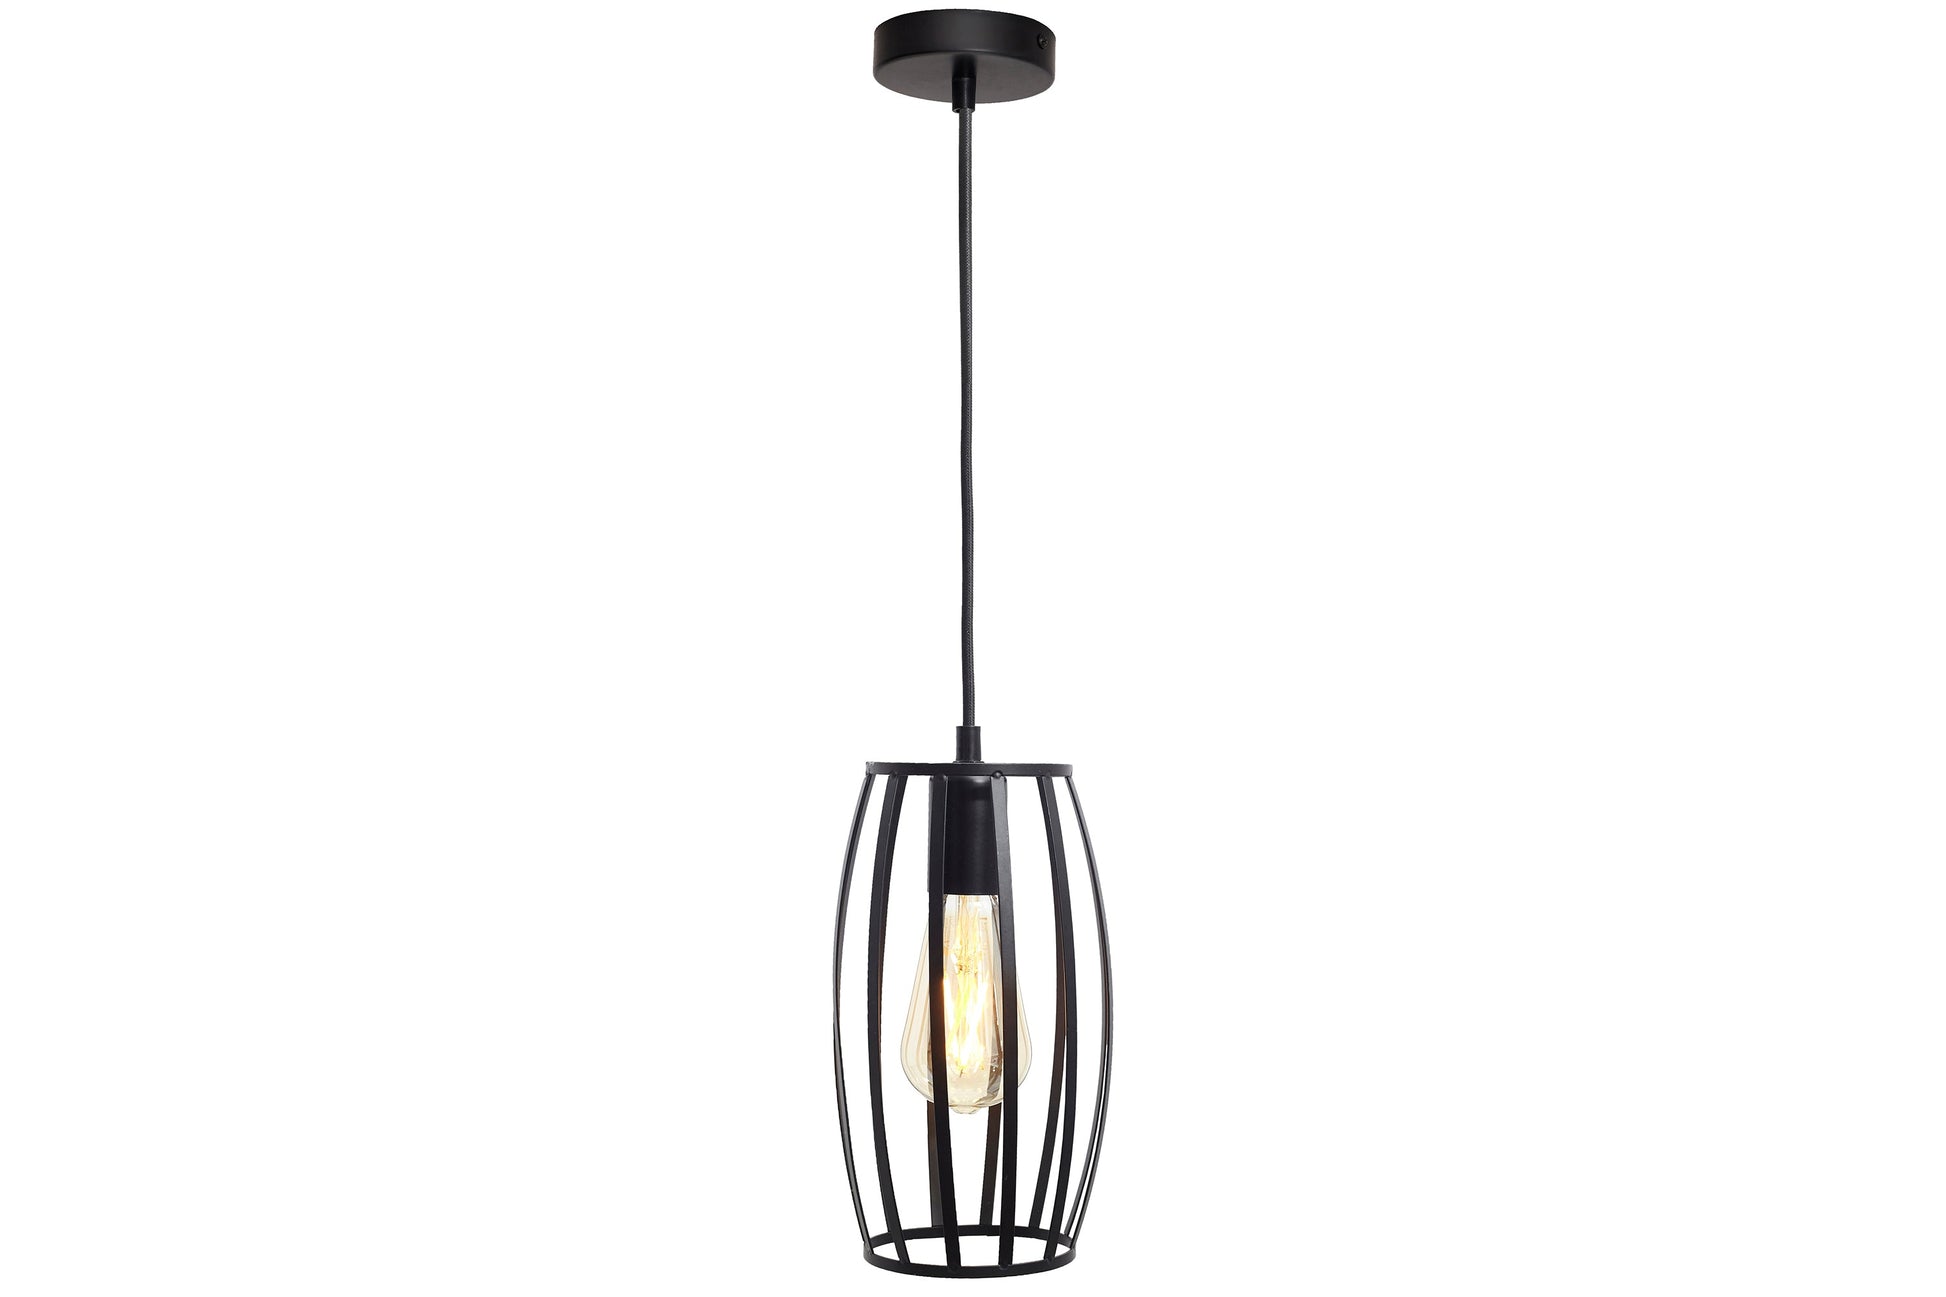 4lite WiZ Connected Decorative Pear Cage Lighting Pendant with ST64 Amber Coated Filament LED Smart Bulb - Black - maplin.co.uk